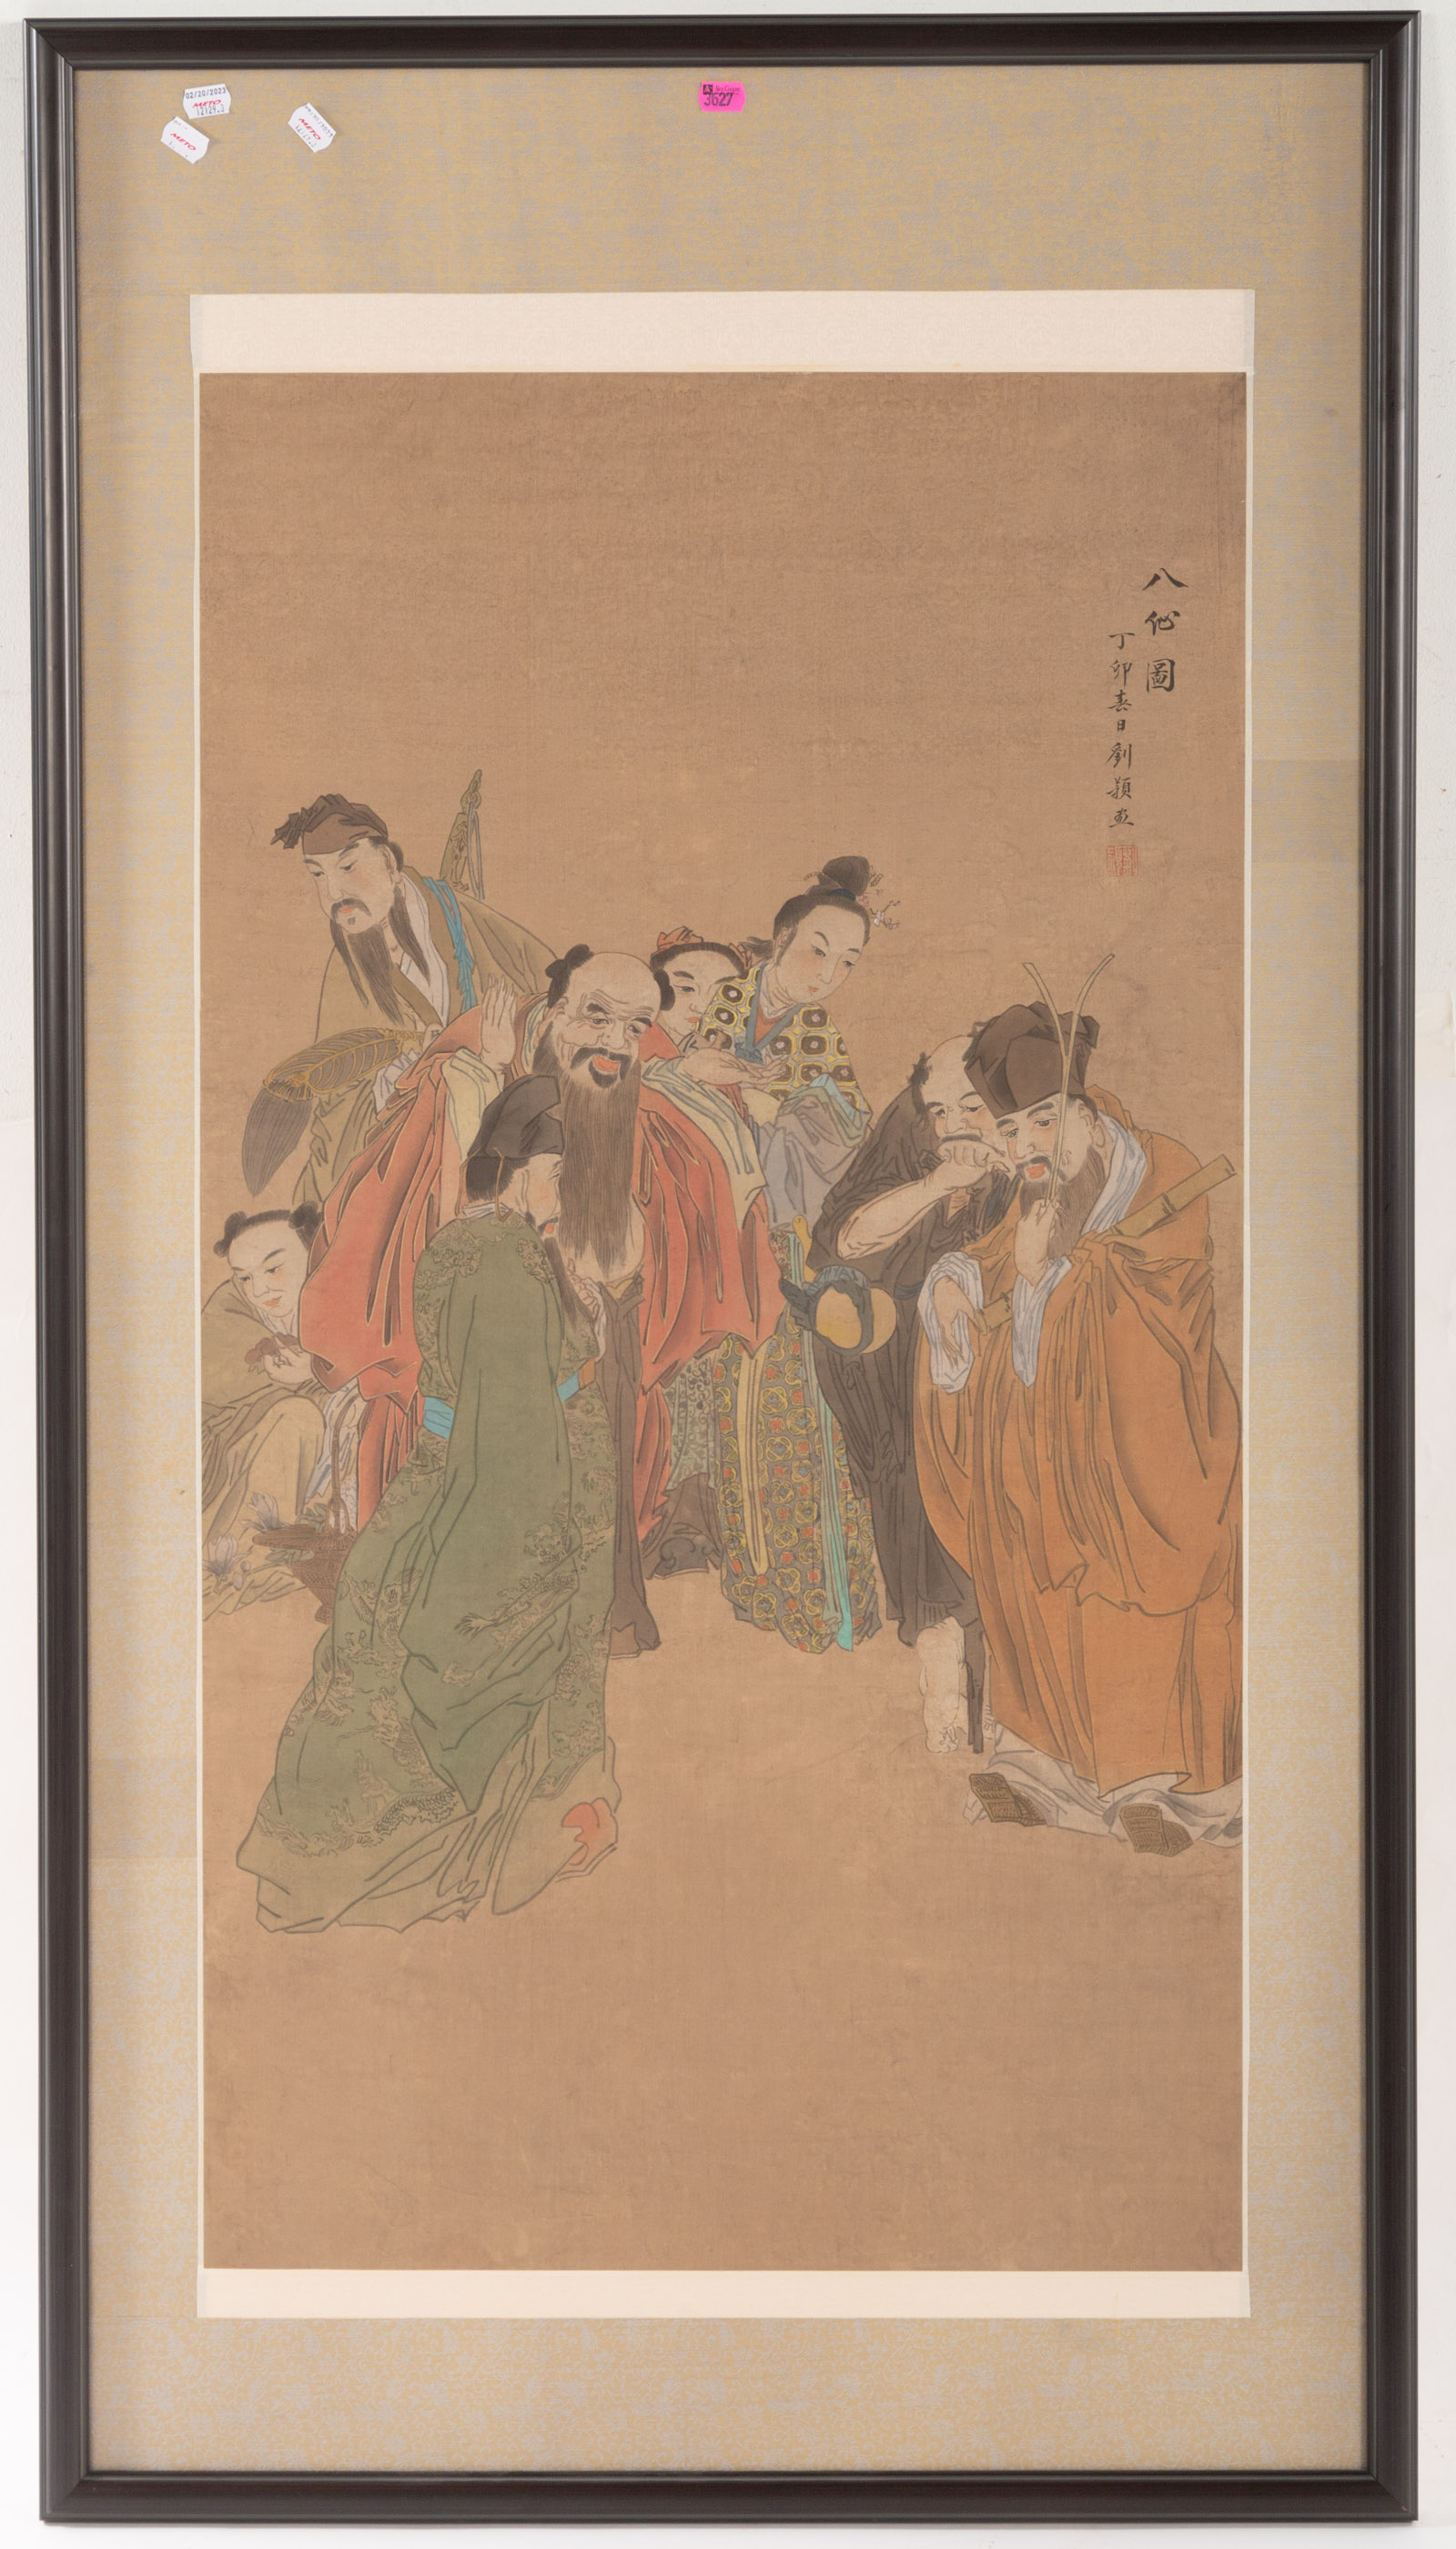 FRAMED CHINESE PRINTED SCROLL Image